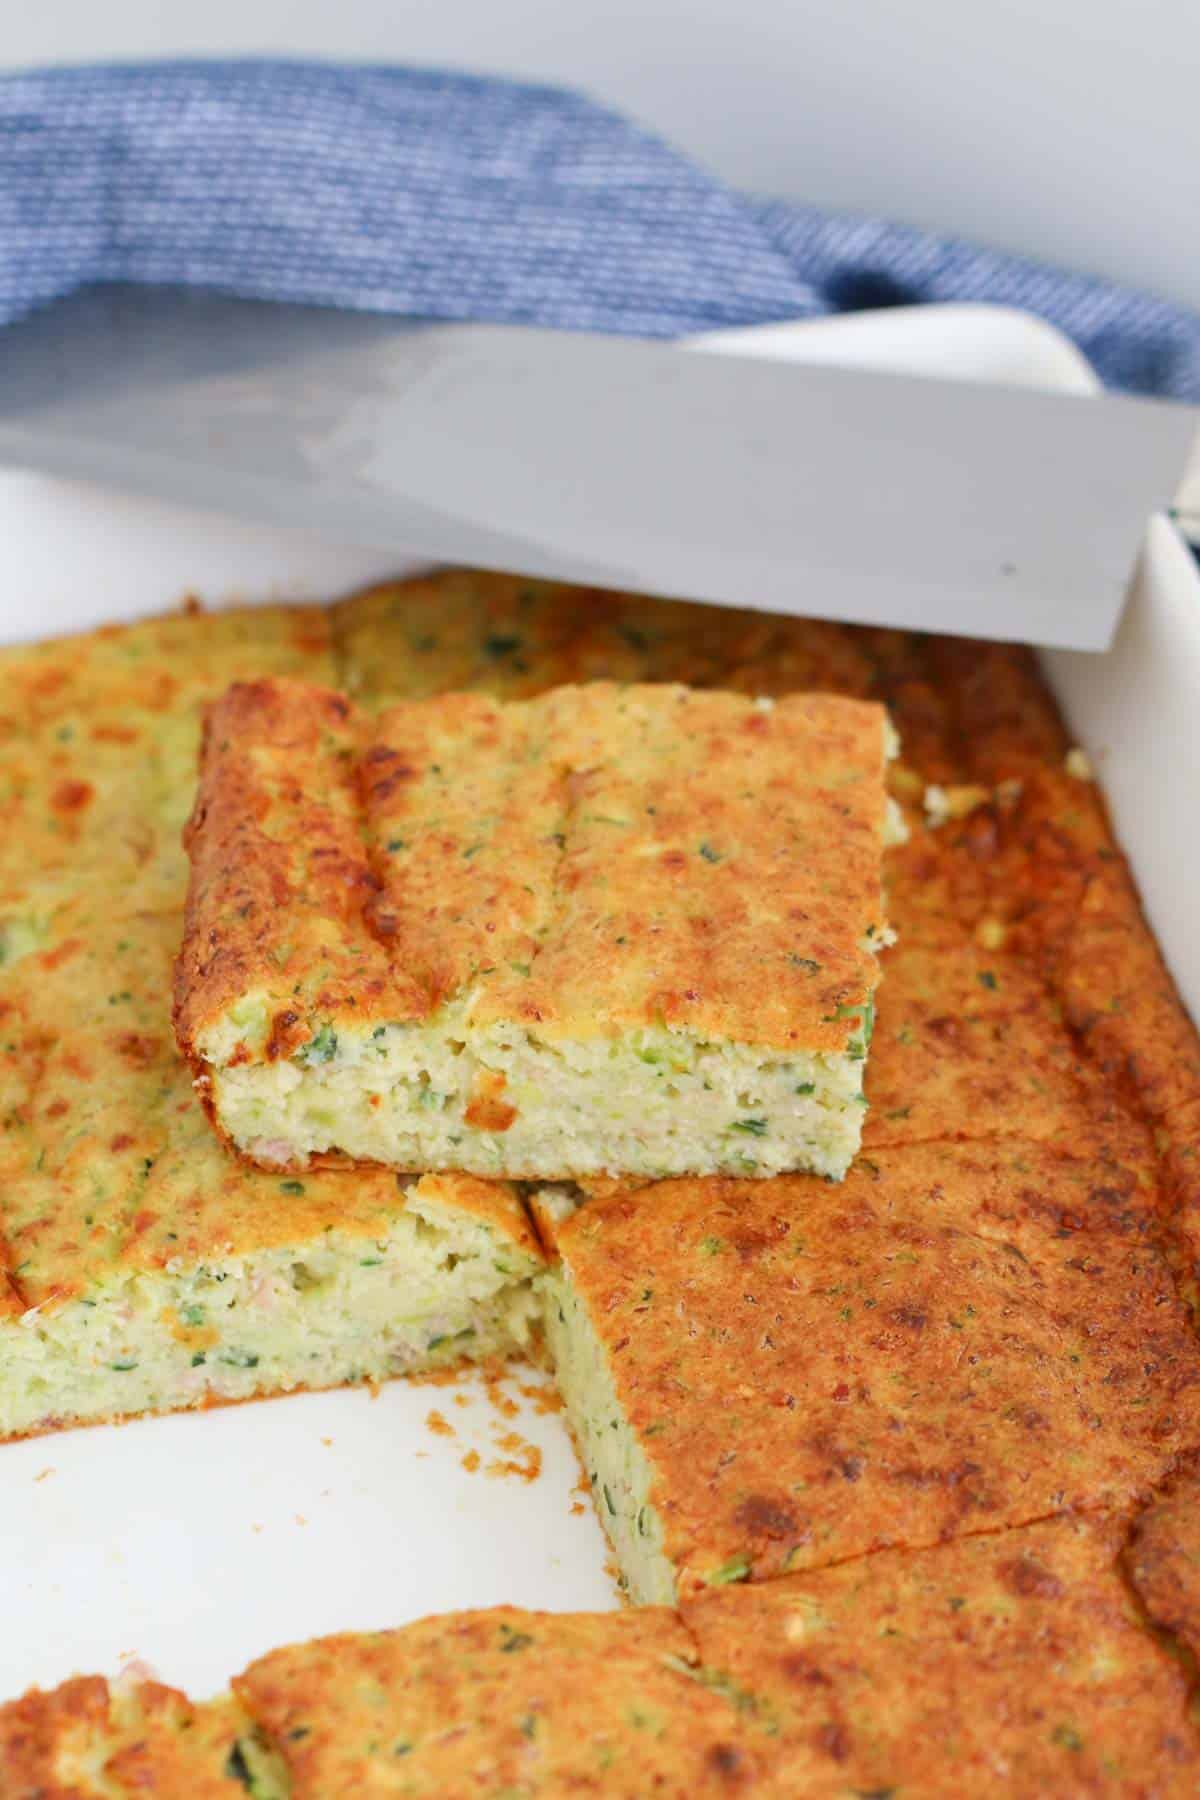 A square of zucchini slice in a baking tray.